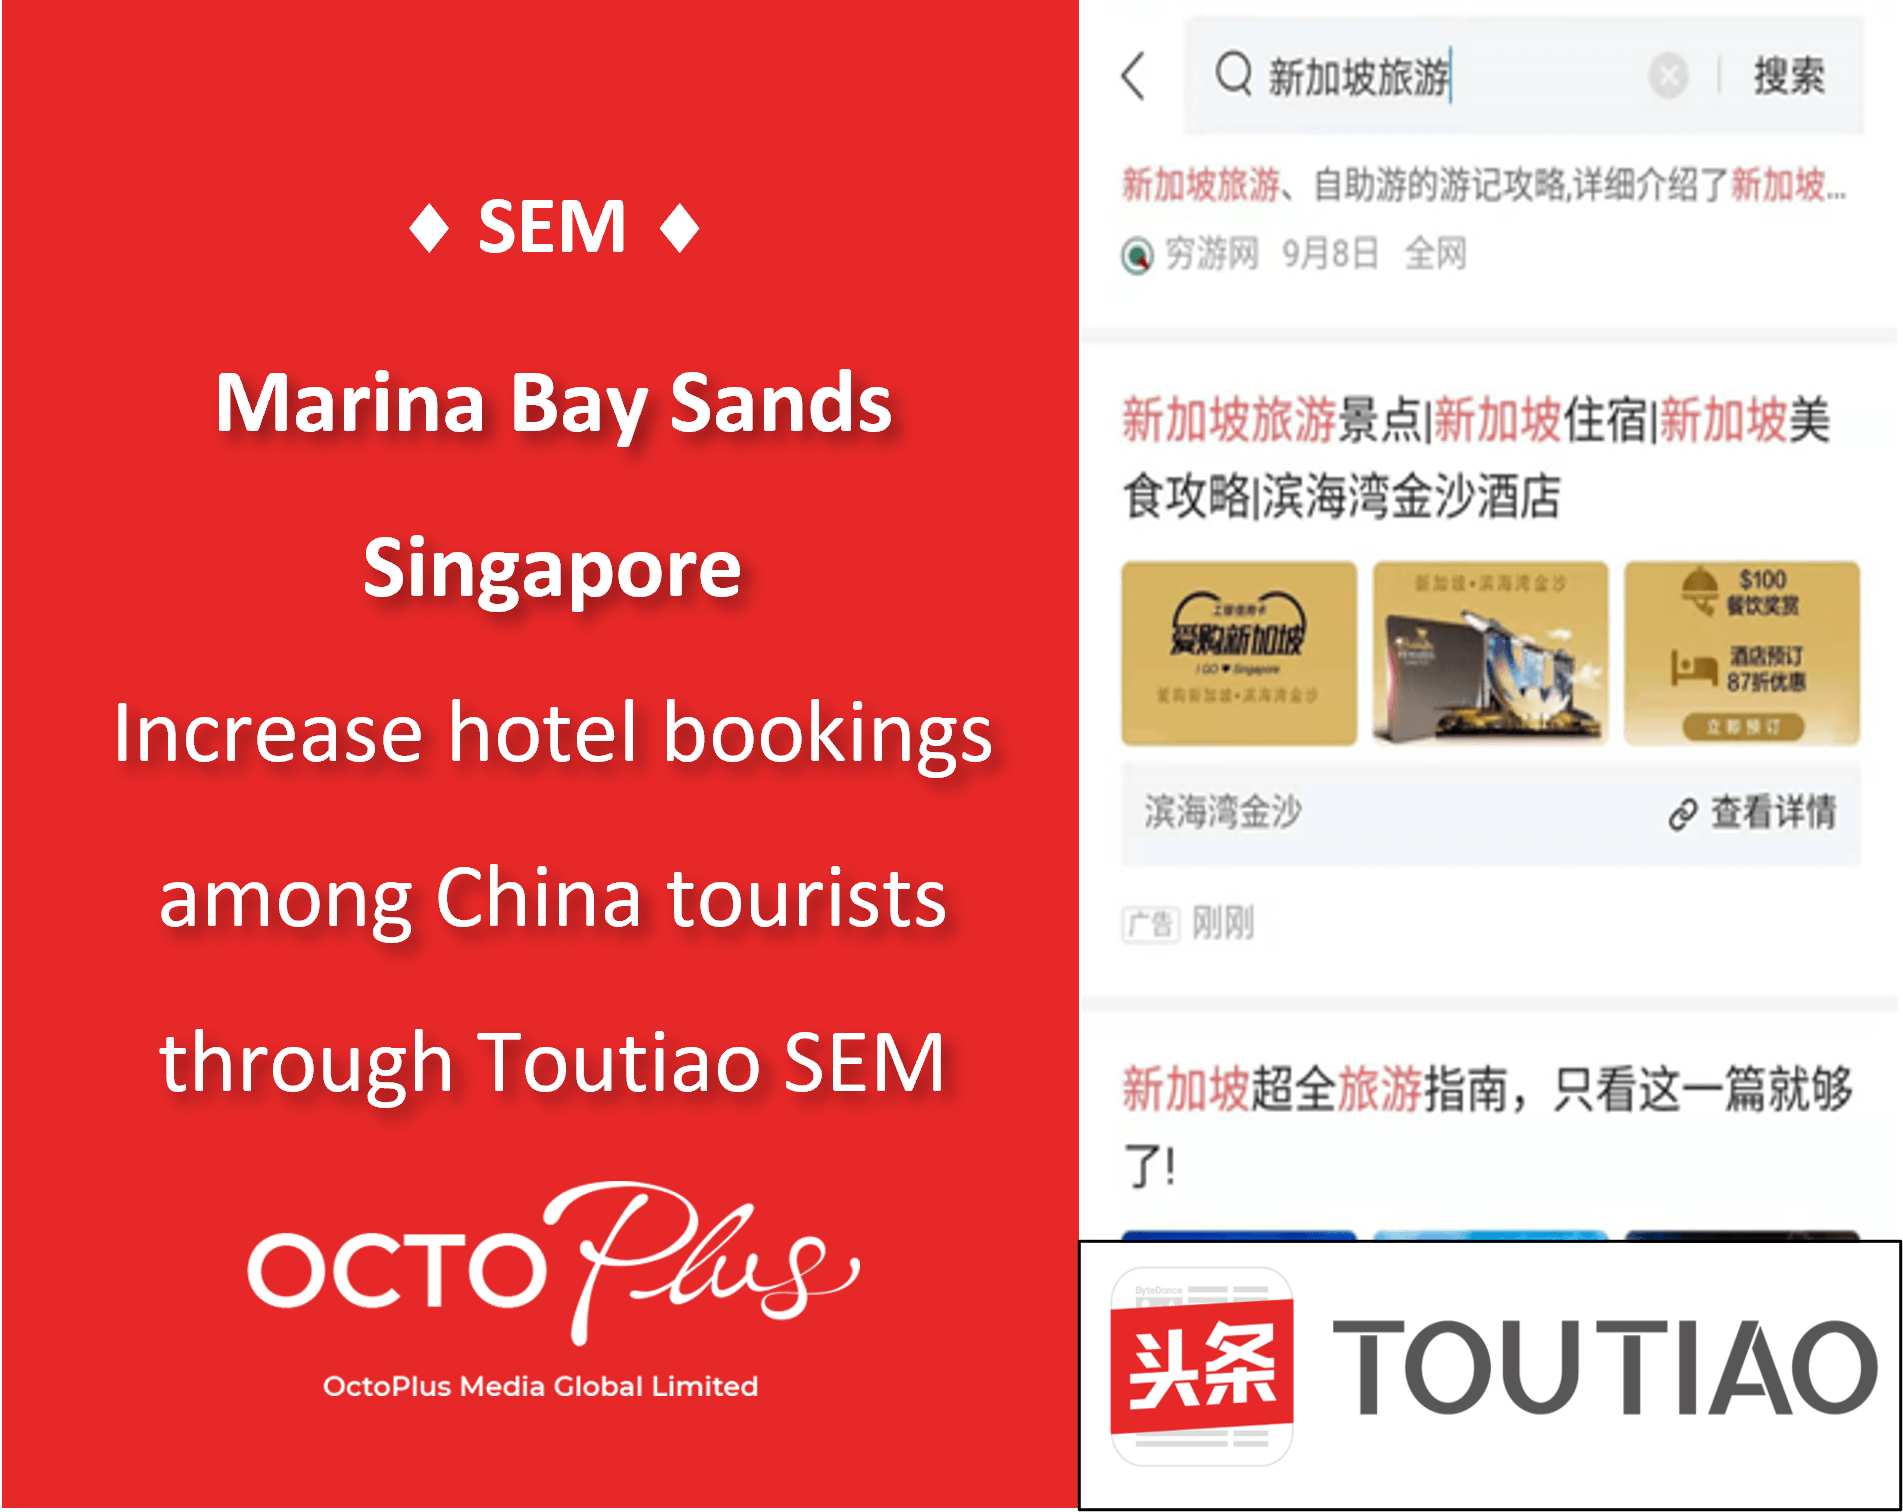 Toutiao SEM Marketing to Promote Chinese Travellers' Booking - Marina Bay Sands, Singapore